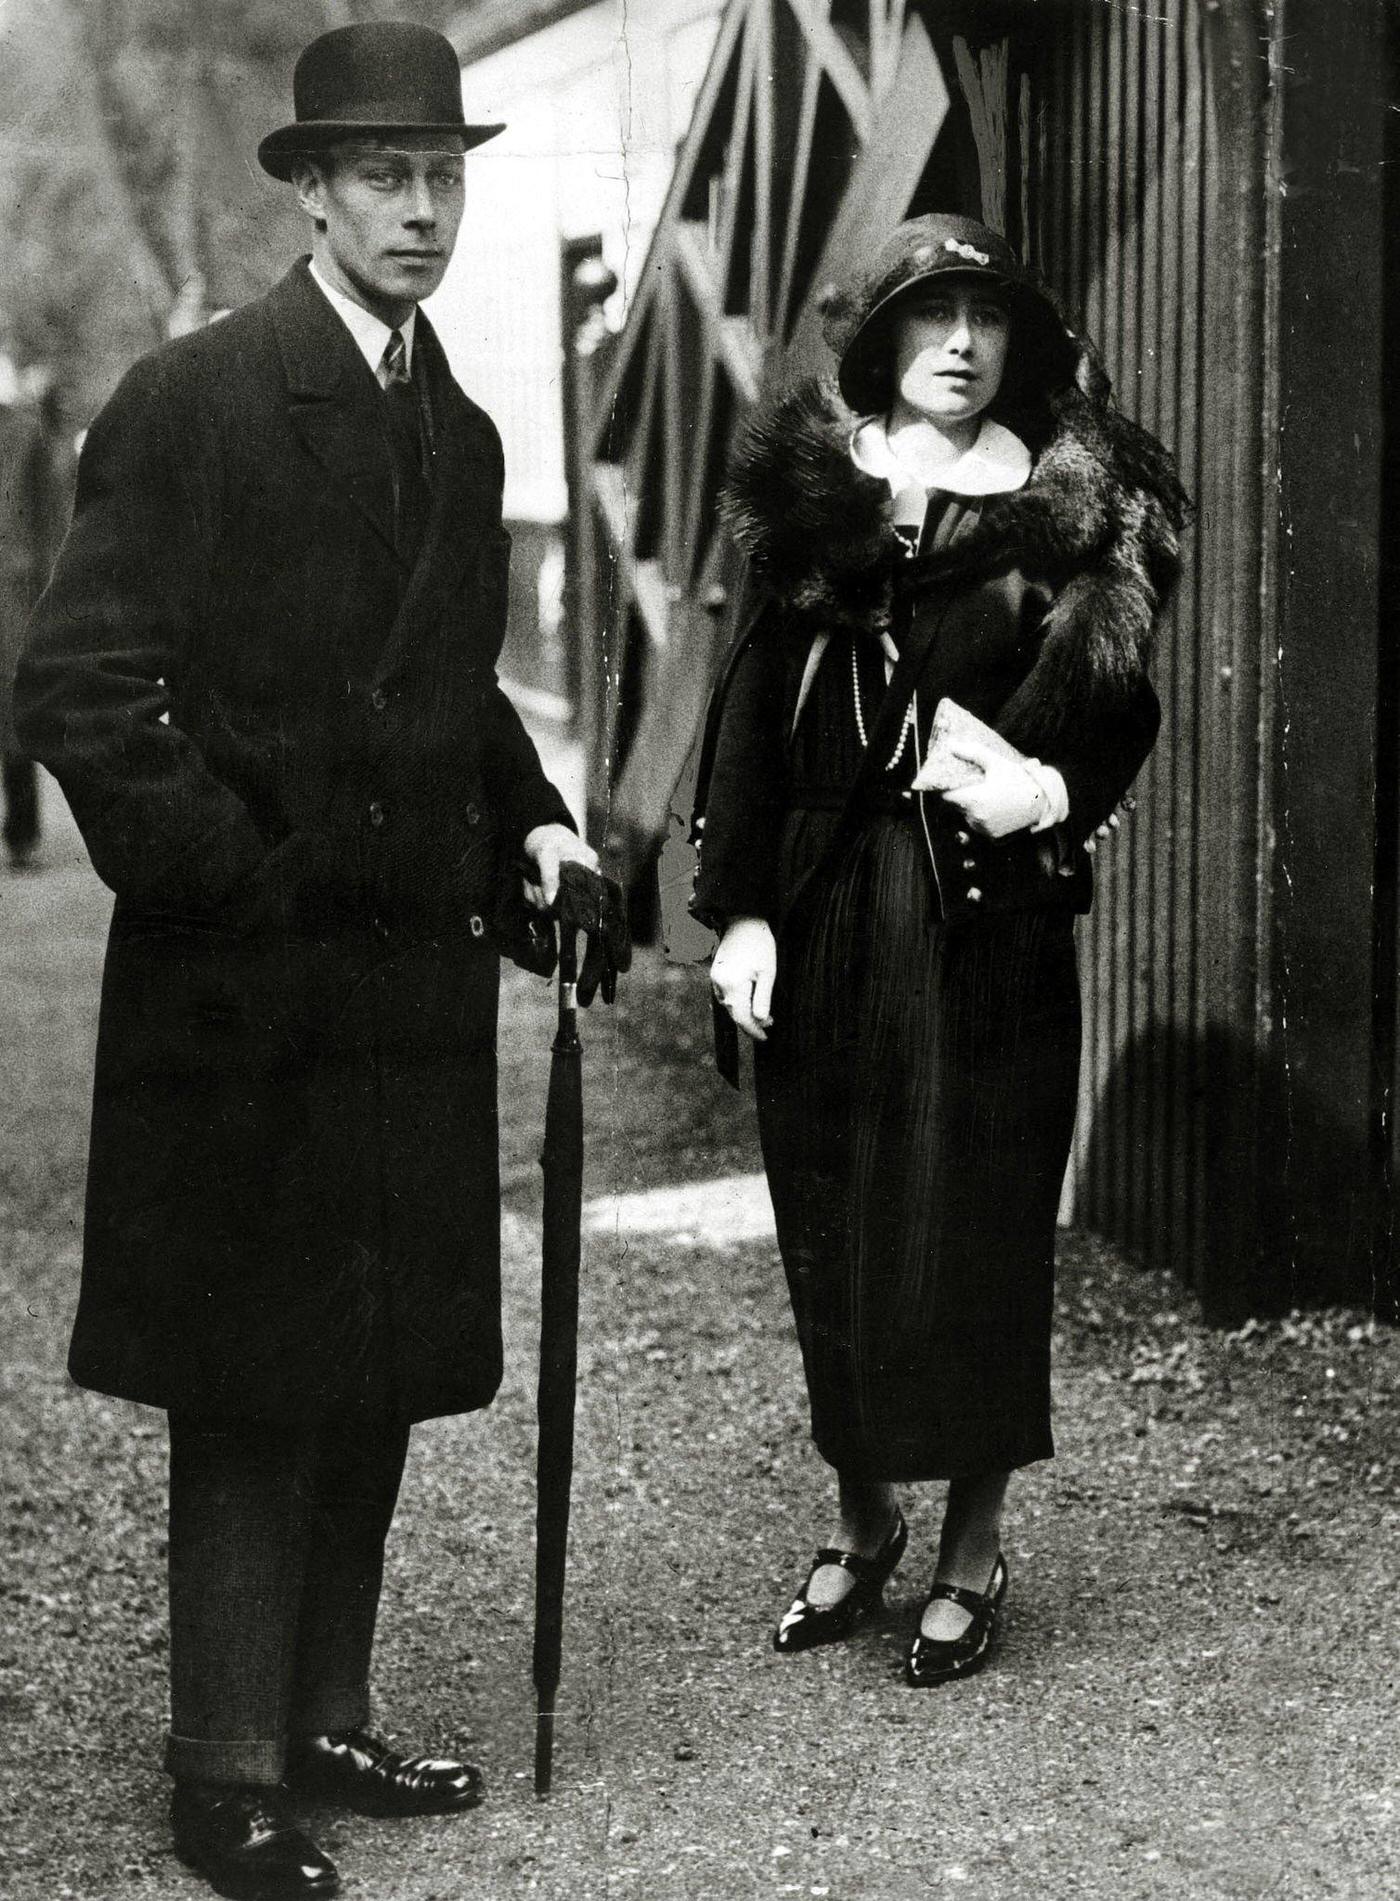 Duke and Duchess of York on their honeymoon at Glamis Castle, Duke became King George VI, with Elizabeth as his Queen Consort